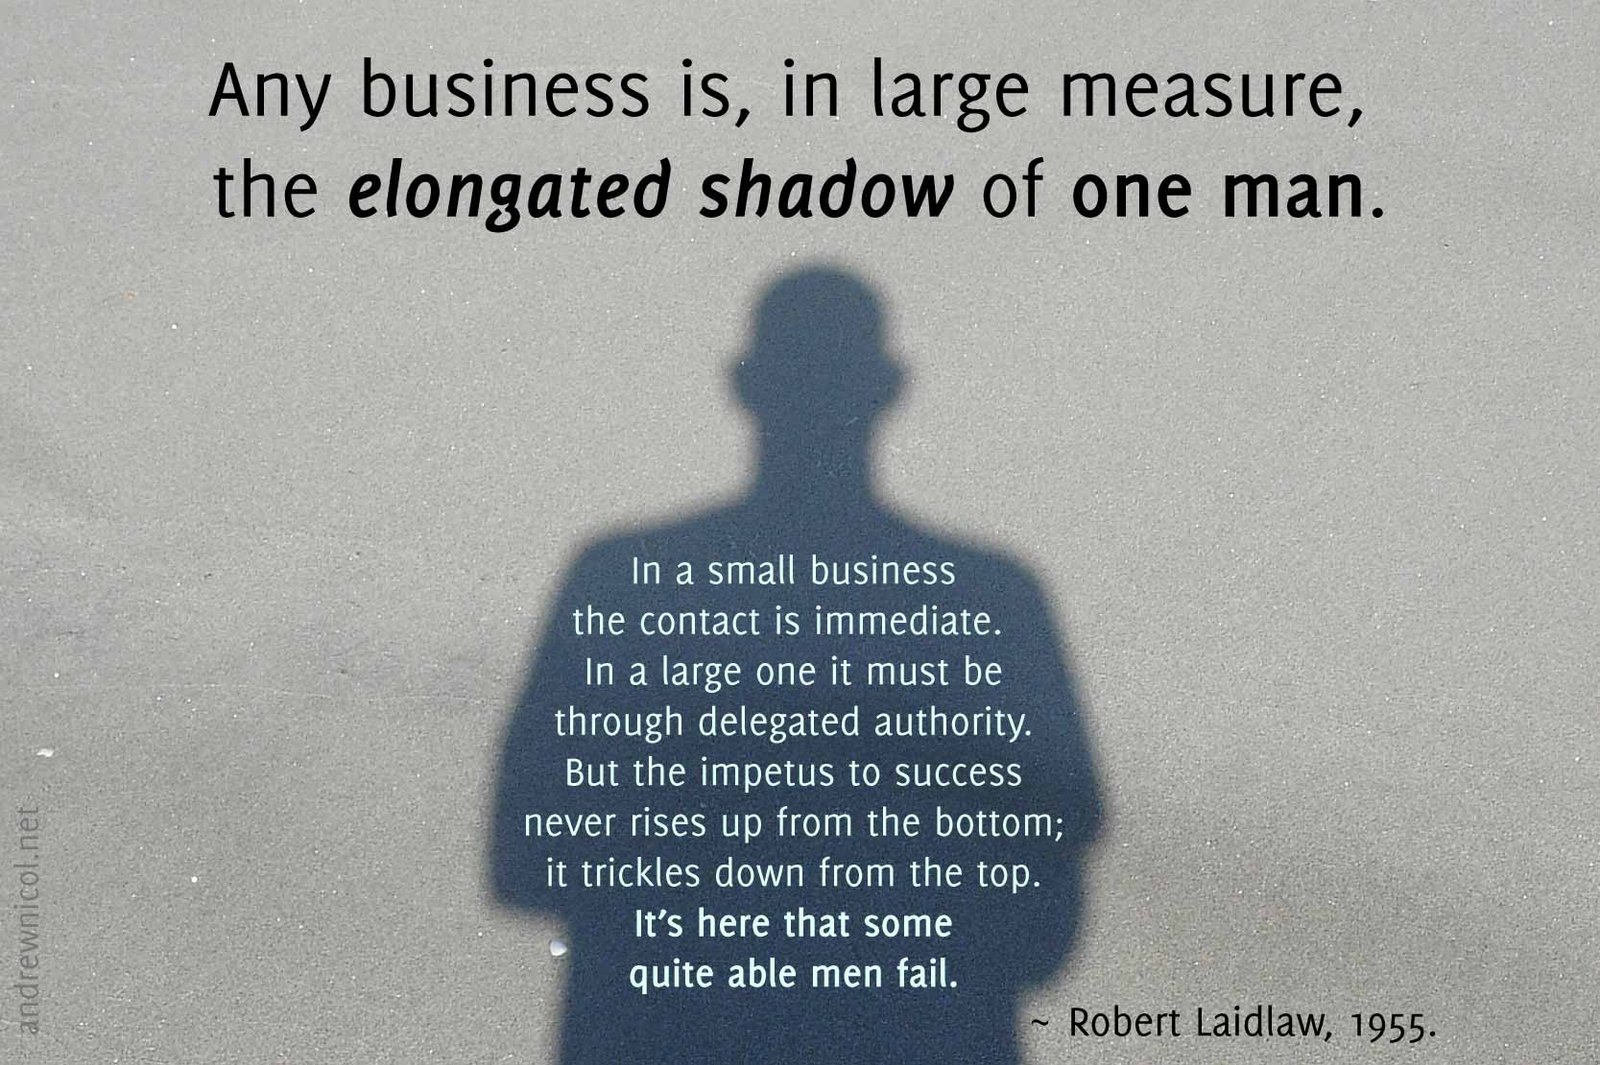 Business is the elongated shadow of one man